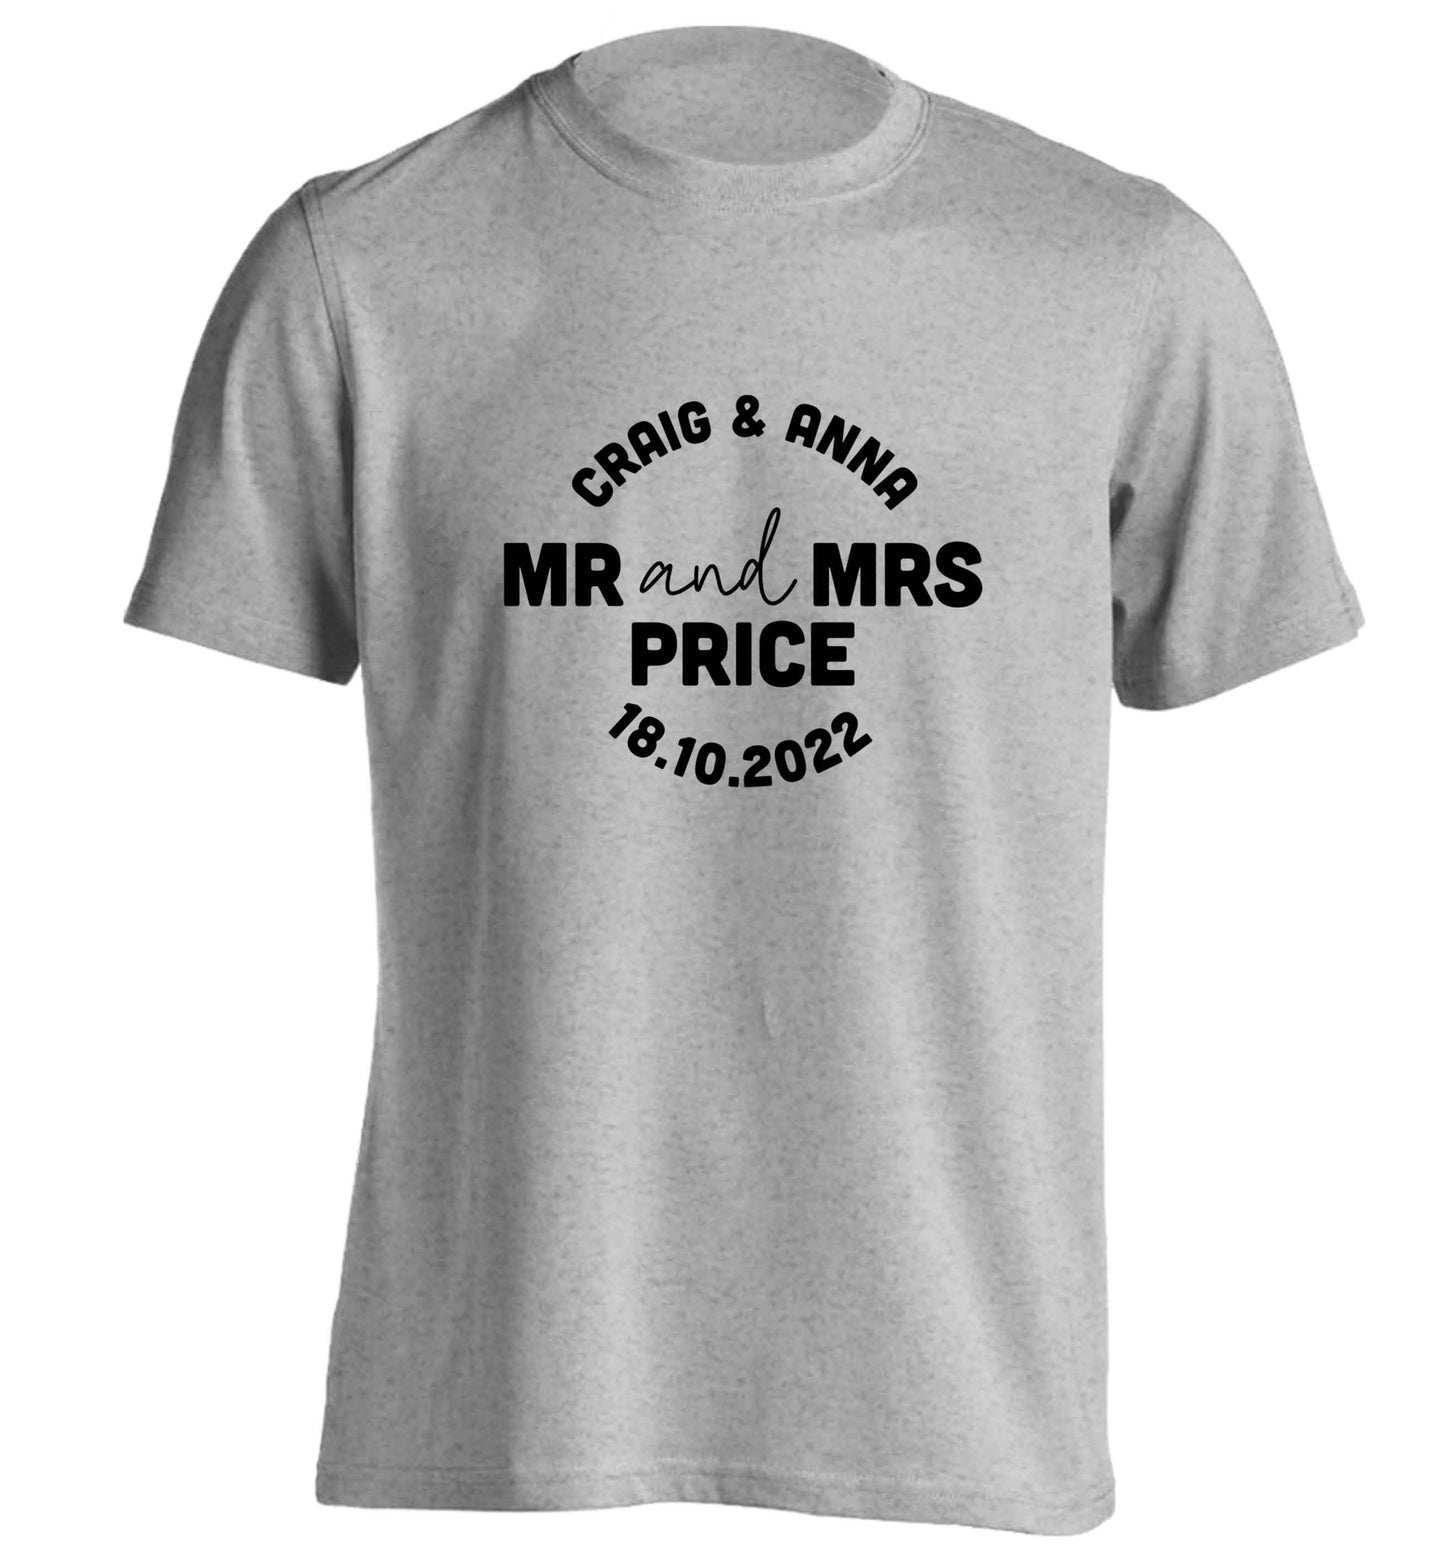 Personalised Mr and Mrs wedding and date! Ideal wedding favours! adults unisex grey Tshirt 2XL